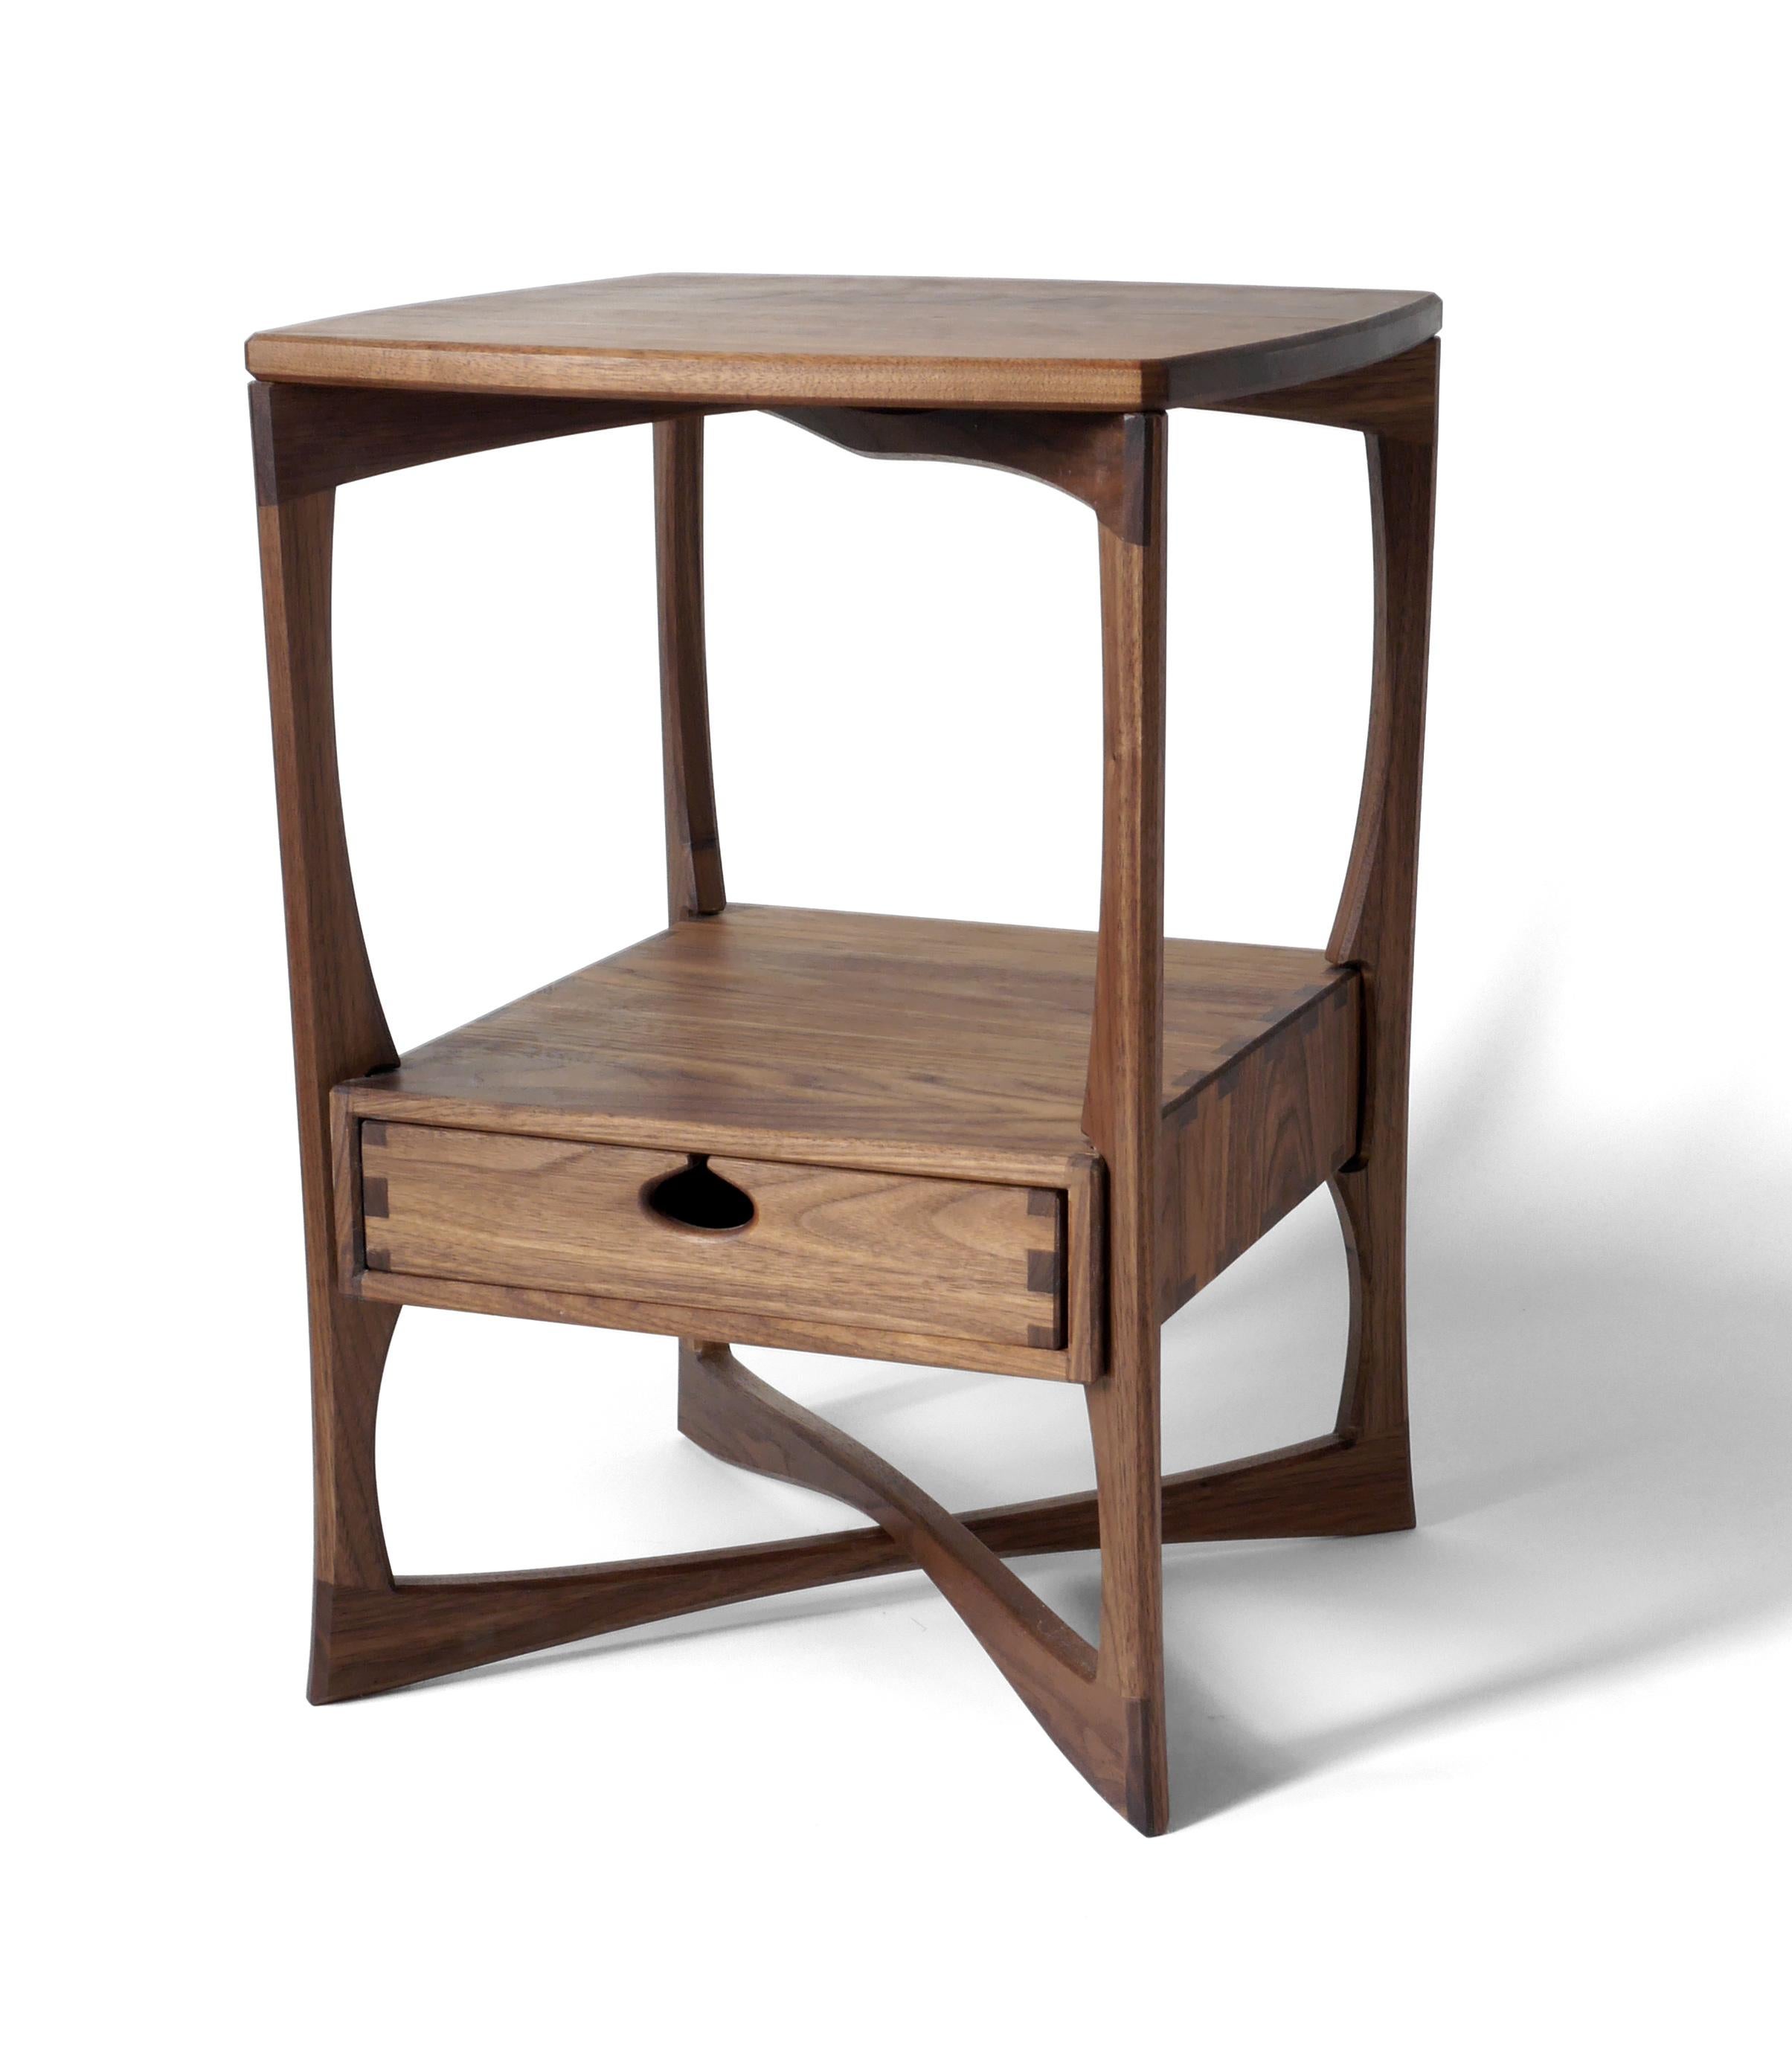 The detail-rich Roke Side Table is made out of solid black walnut hardwood and has a single drawer mounted on wooden runners in a traditional drawer box. It’s built with exposed joinery that has been carefully designed for beauty and strength.

Like